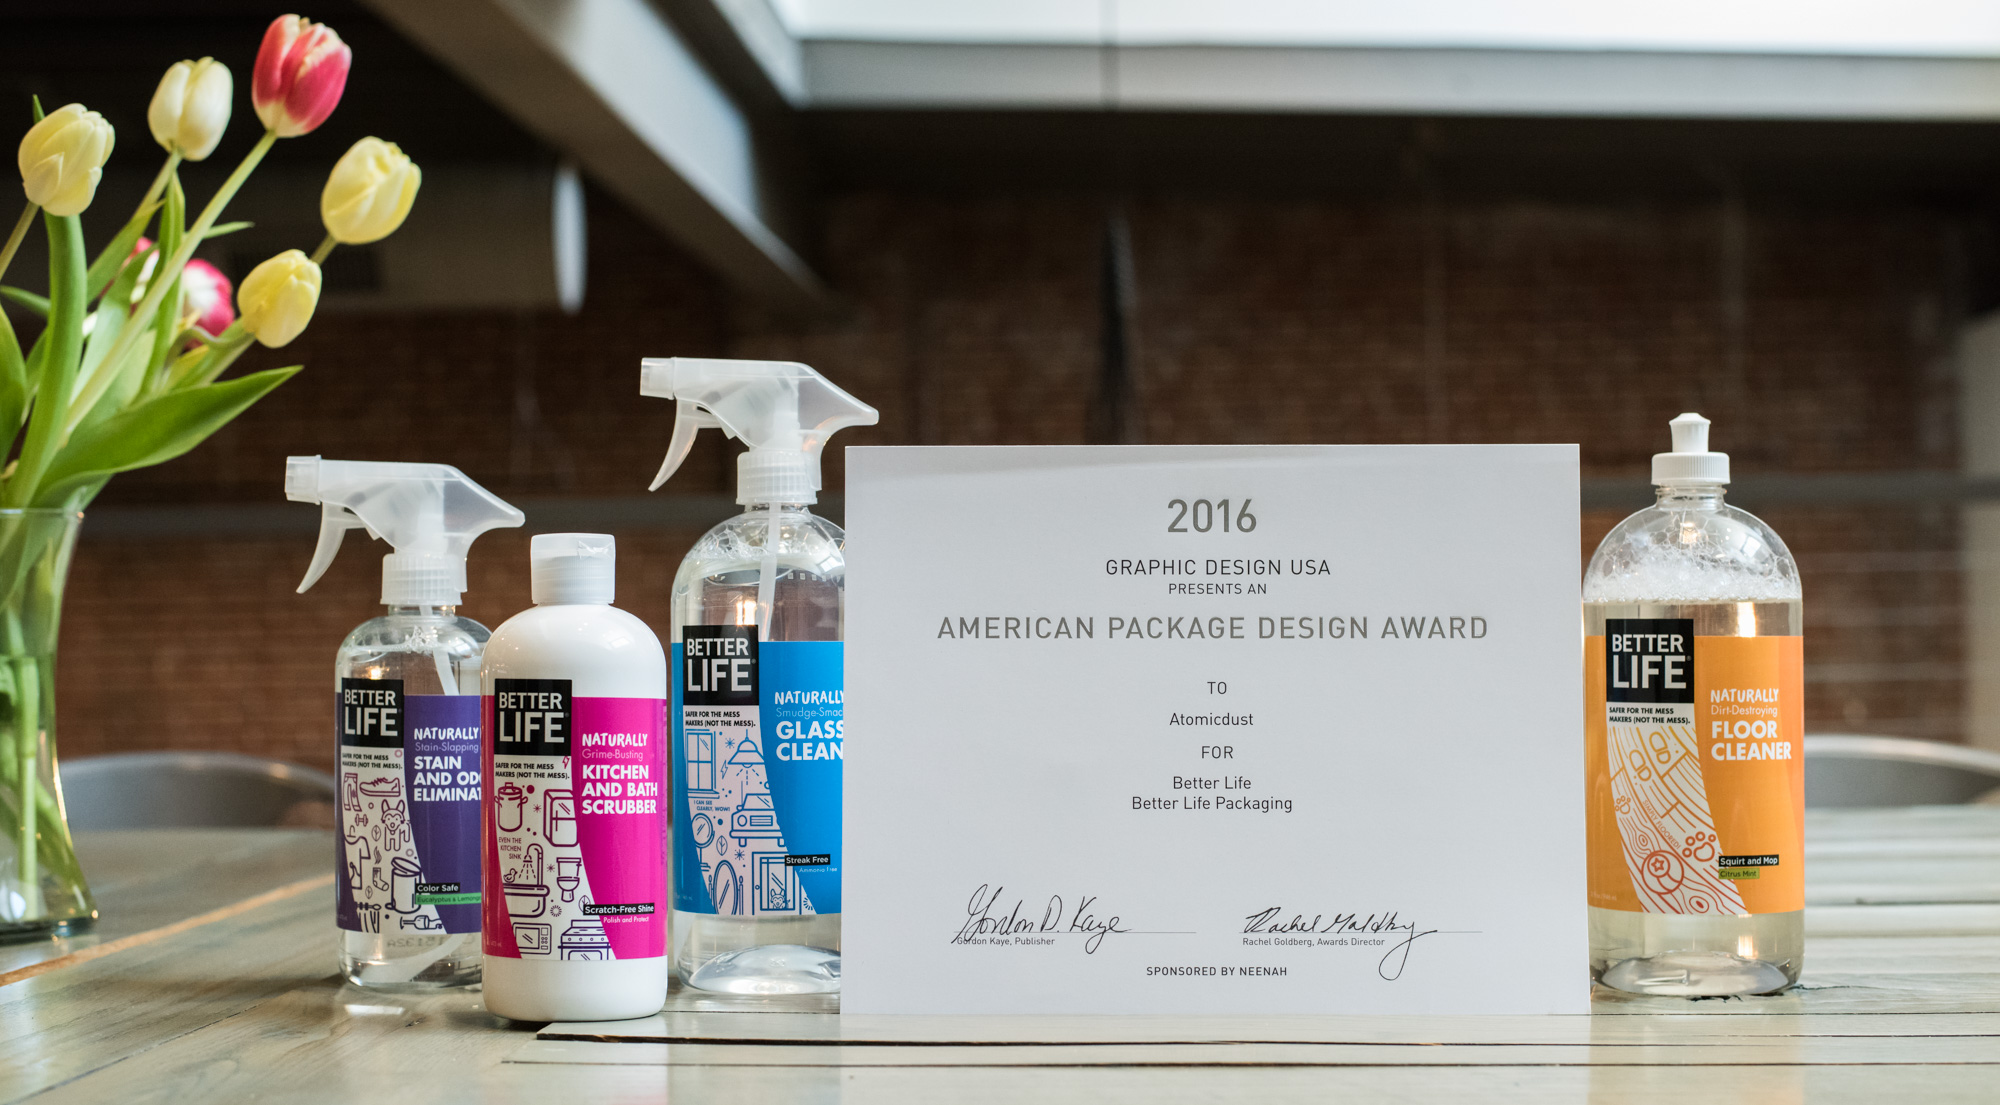 A table with Atomicdust's American Package Design Award and Better Life cleaning products with their new label design.